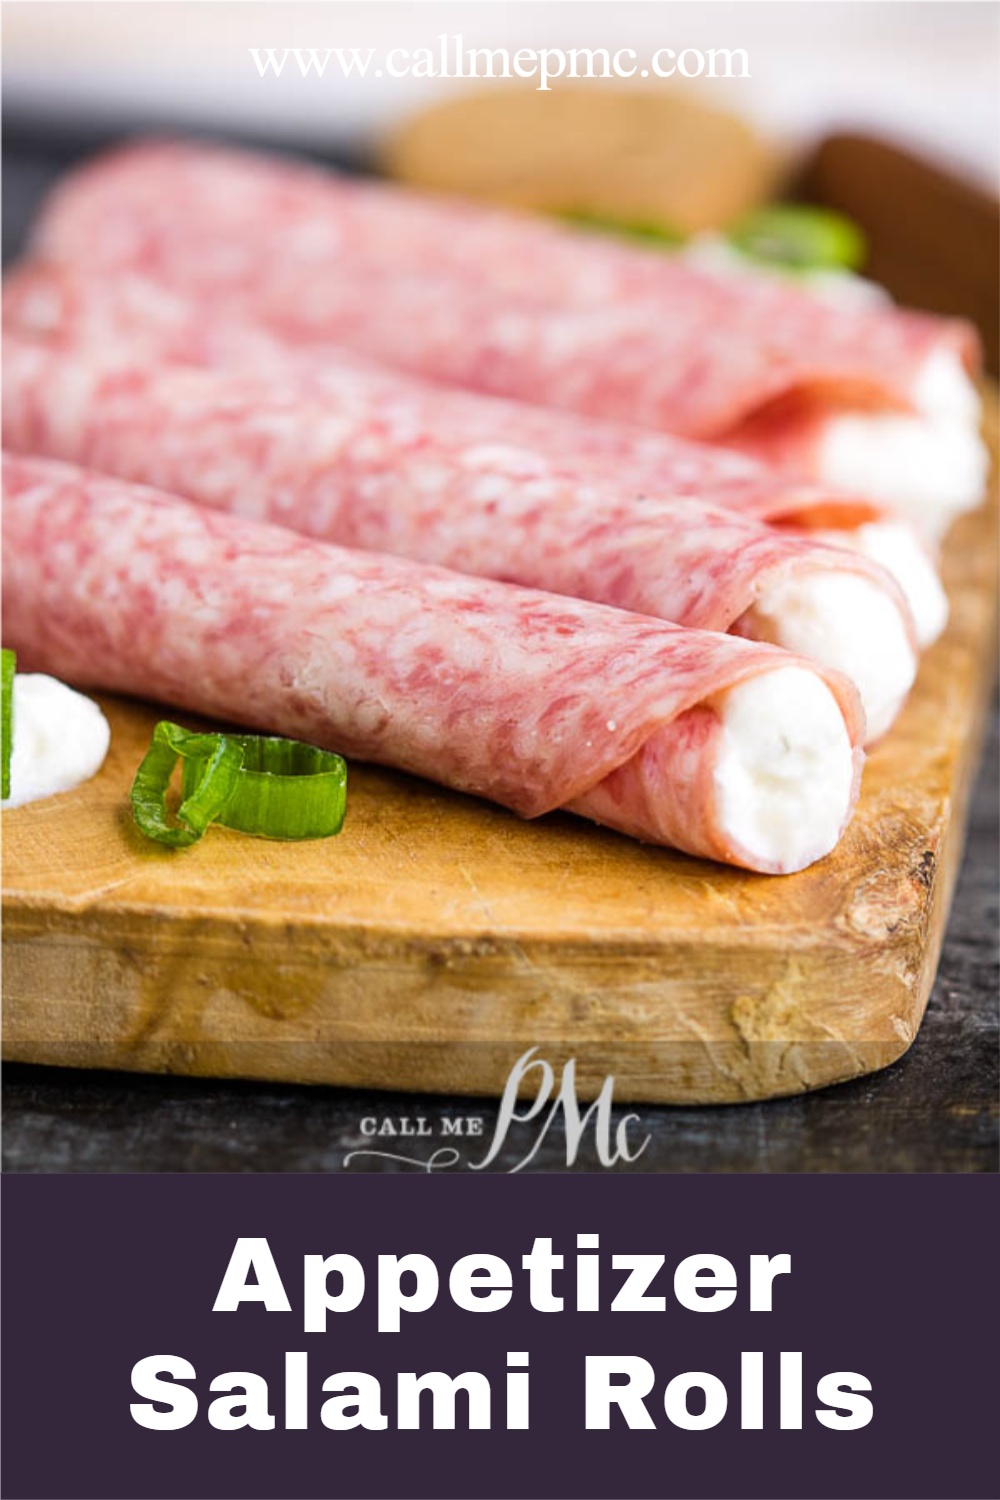 Appetizer Salami Rolls makes an easy appetizer for entertaining. Two ingredients & a few minutes for yummy finger food for charcuterie. #appetizer #salami #antipasta #creamcheese #appetizer #recipe